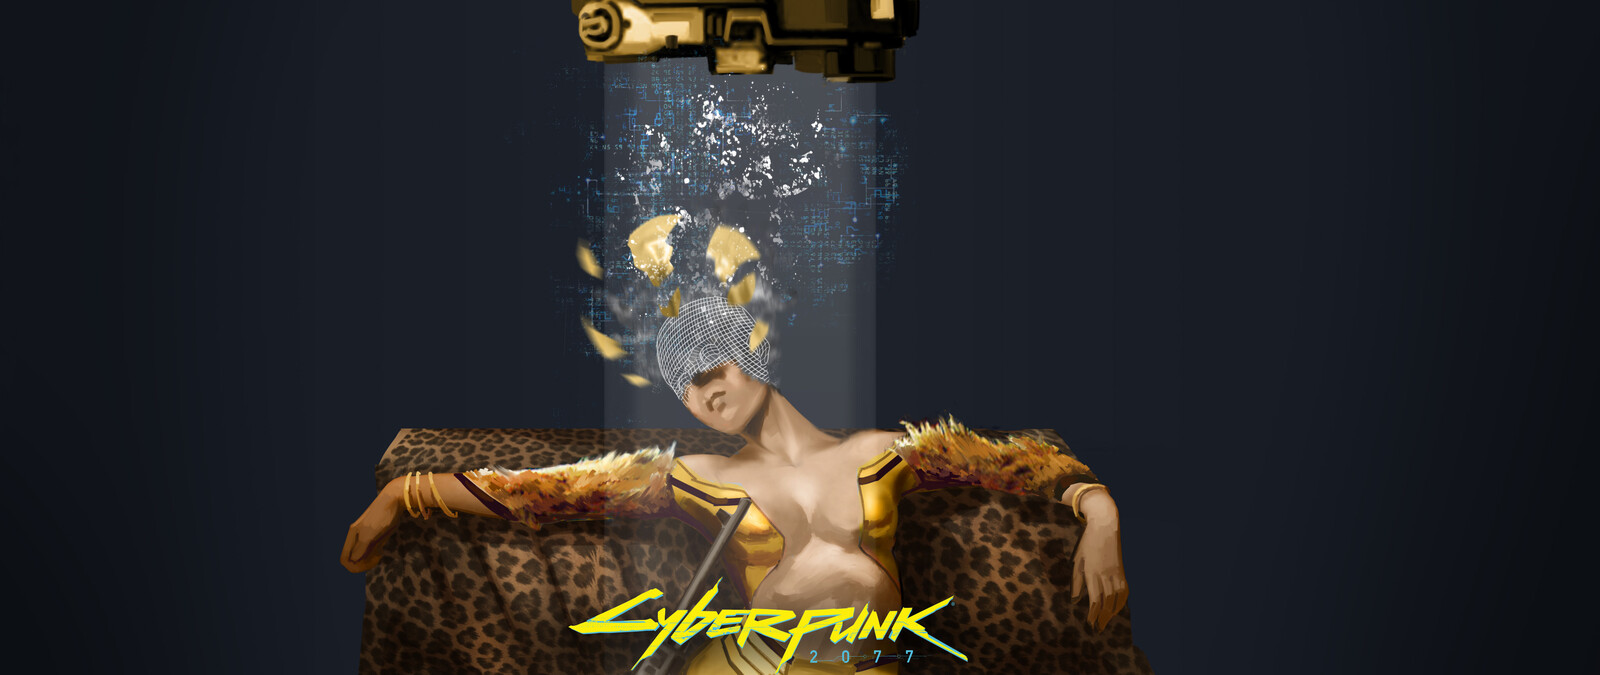 Cyberpunk 2077 - No Save Point by Run the Jewels Music Video - Concept Art